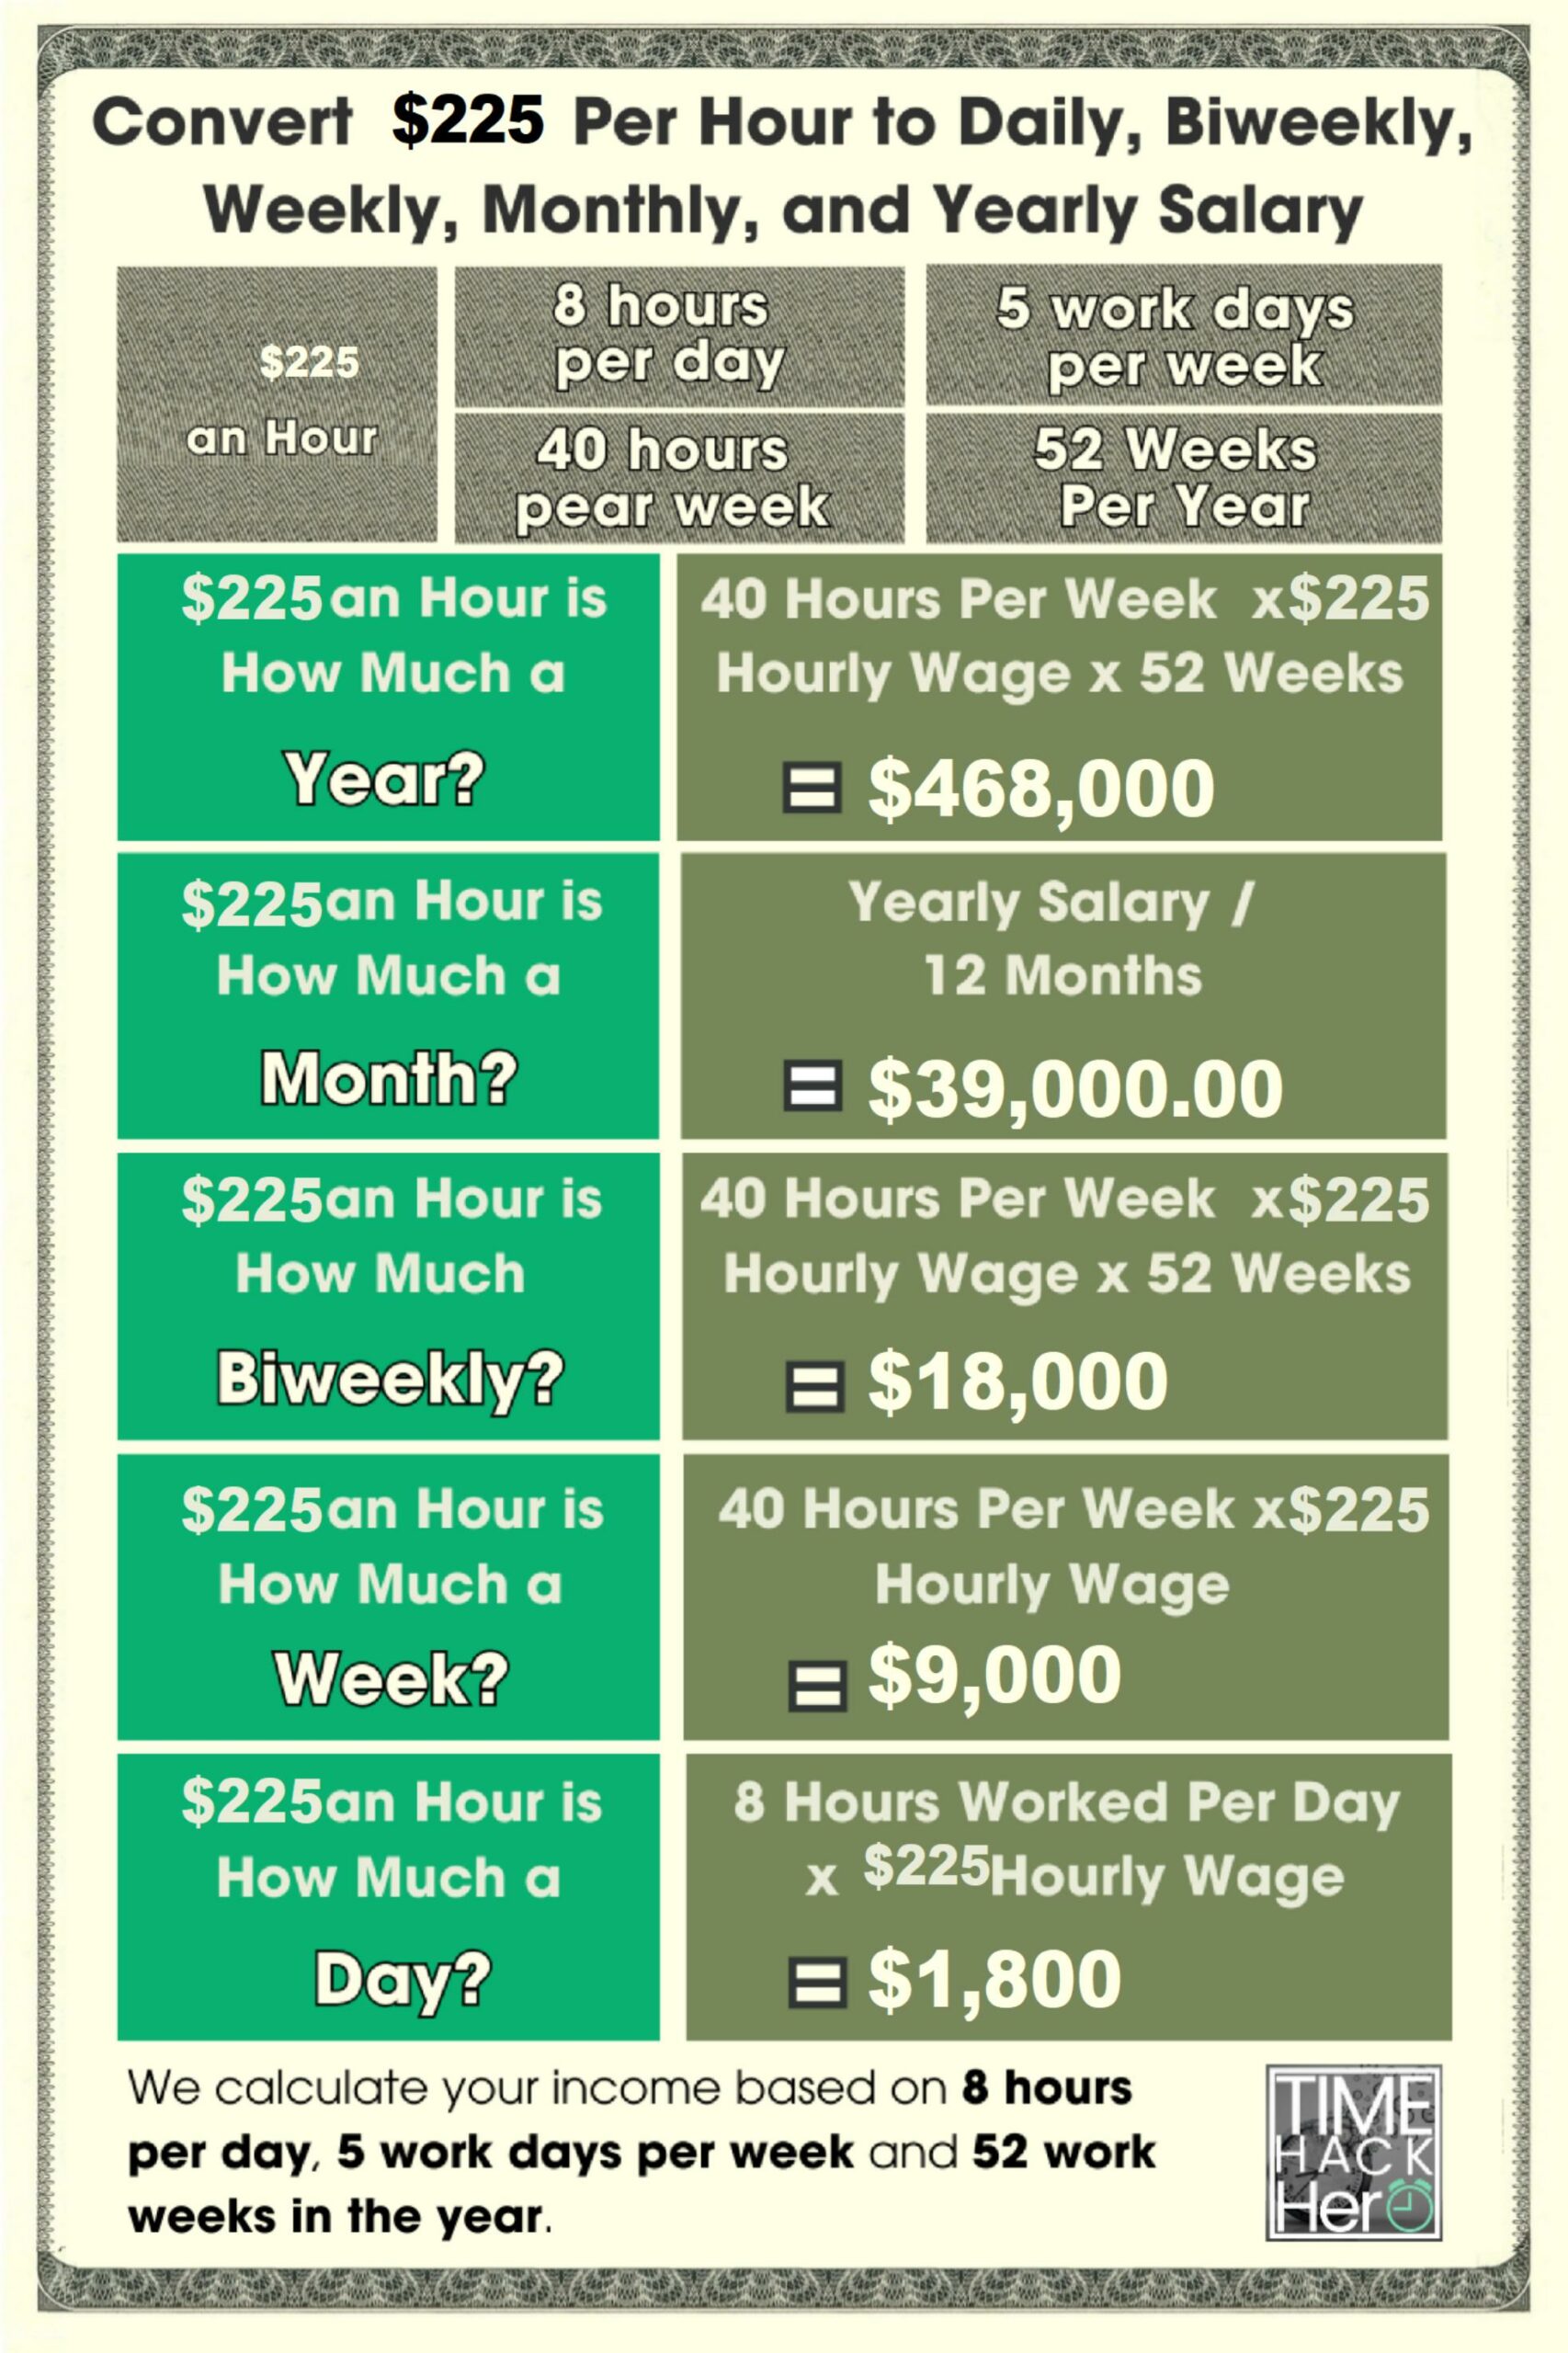 Convert $225 Per Hour to Weekly, Monthly, and Yearly Salary